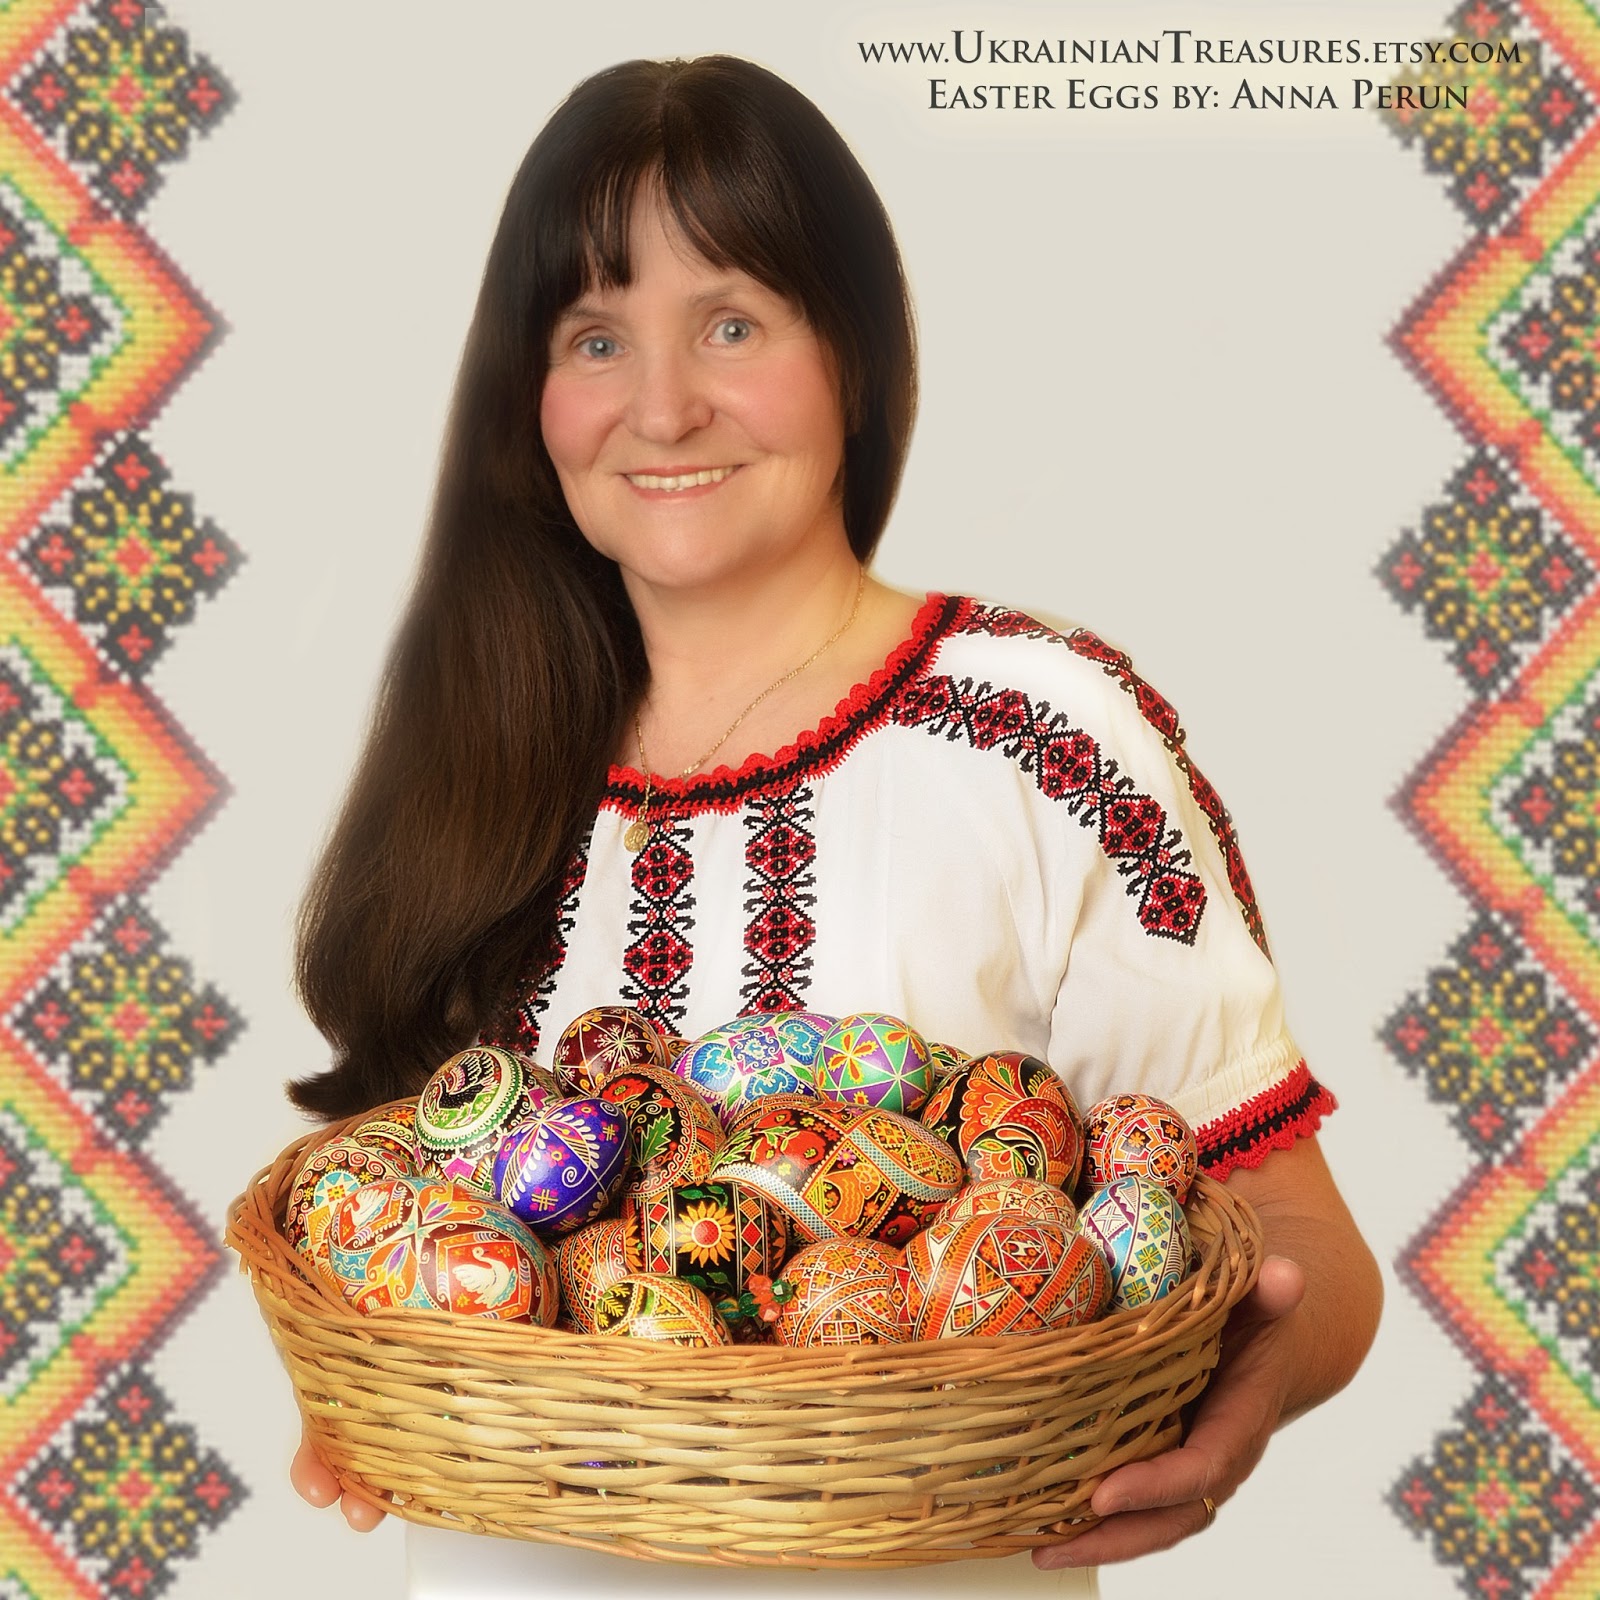 Anna Perun holding a basket full of eggs, wearing an embroidered shirt, with a colorful border on each side of the picture